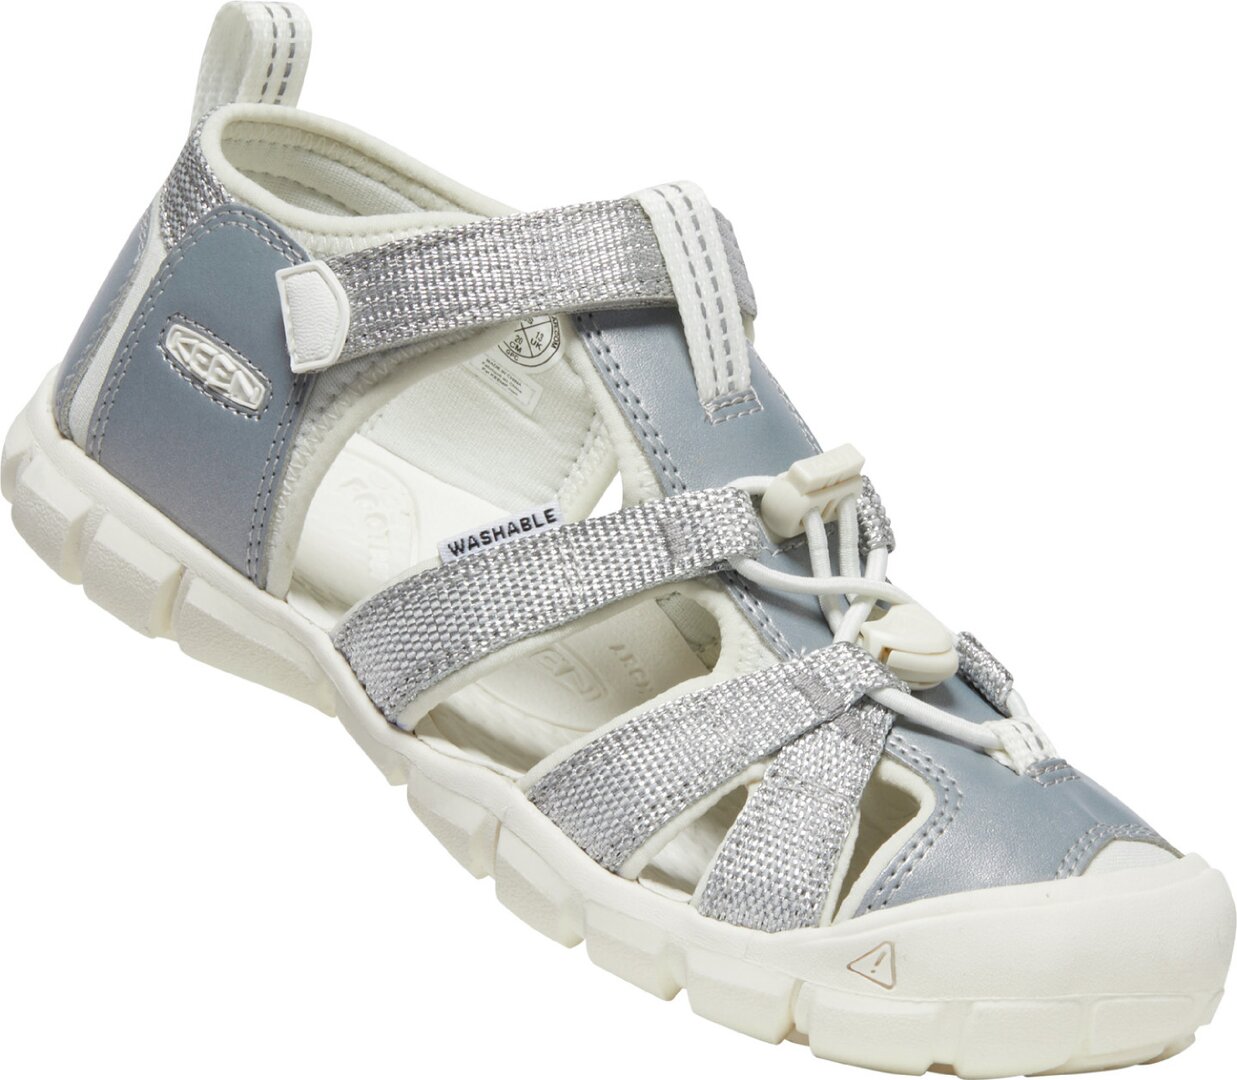 Sandály Keen SEACAMP II CNX YOUTH silver/star white US 1